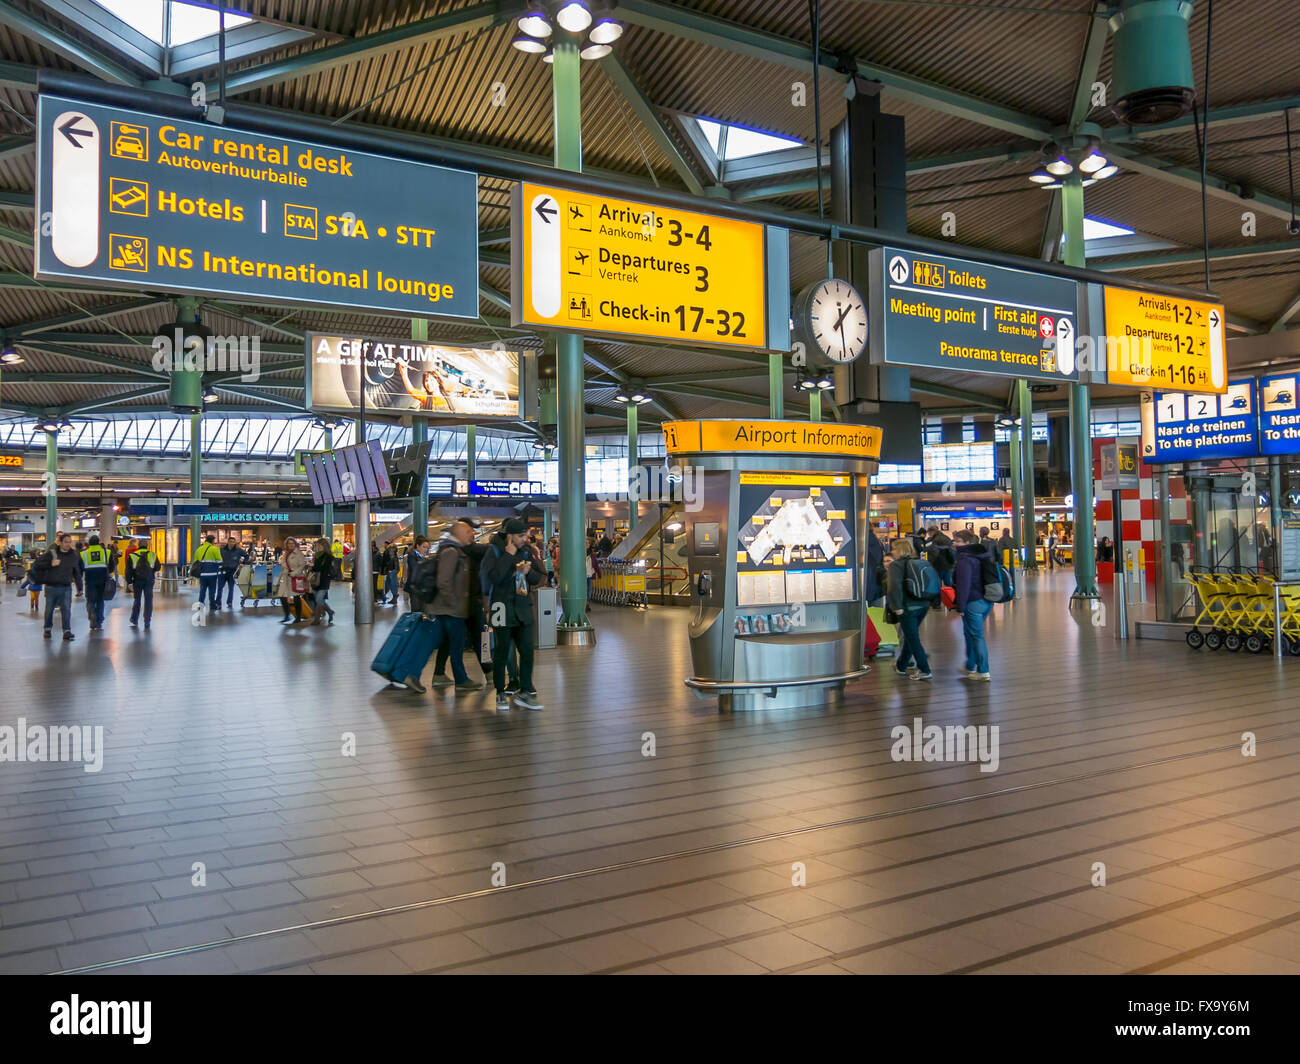 Information Signs And People In Train Terminal Of Schiphol